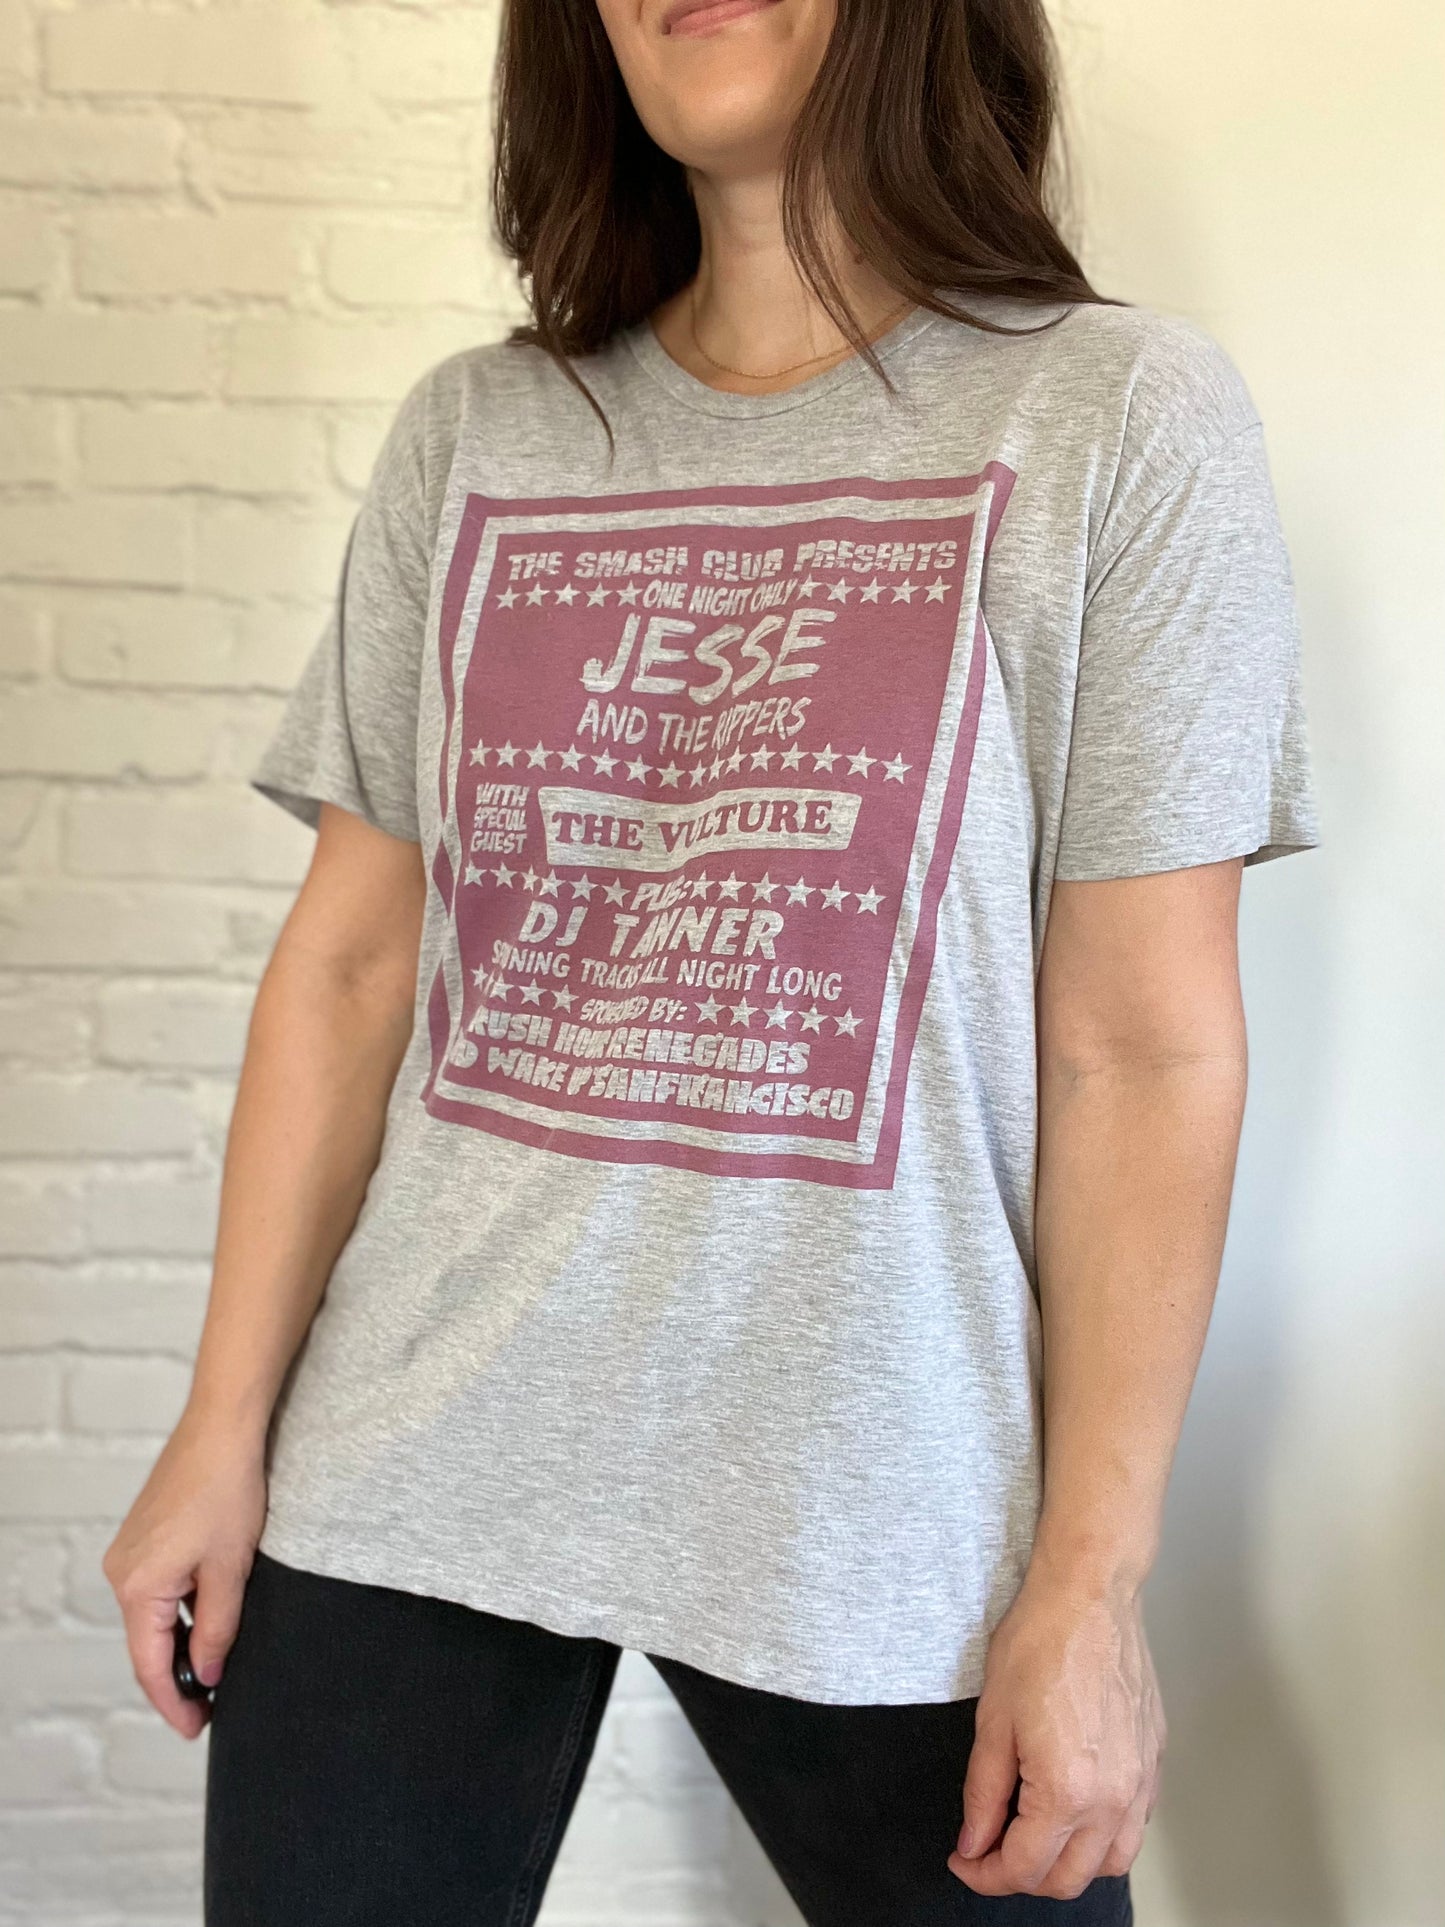 Jessie & the Rippers Tee - Size XL